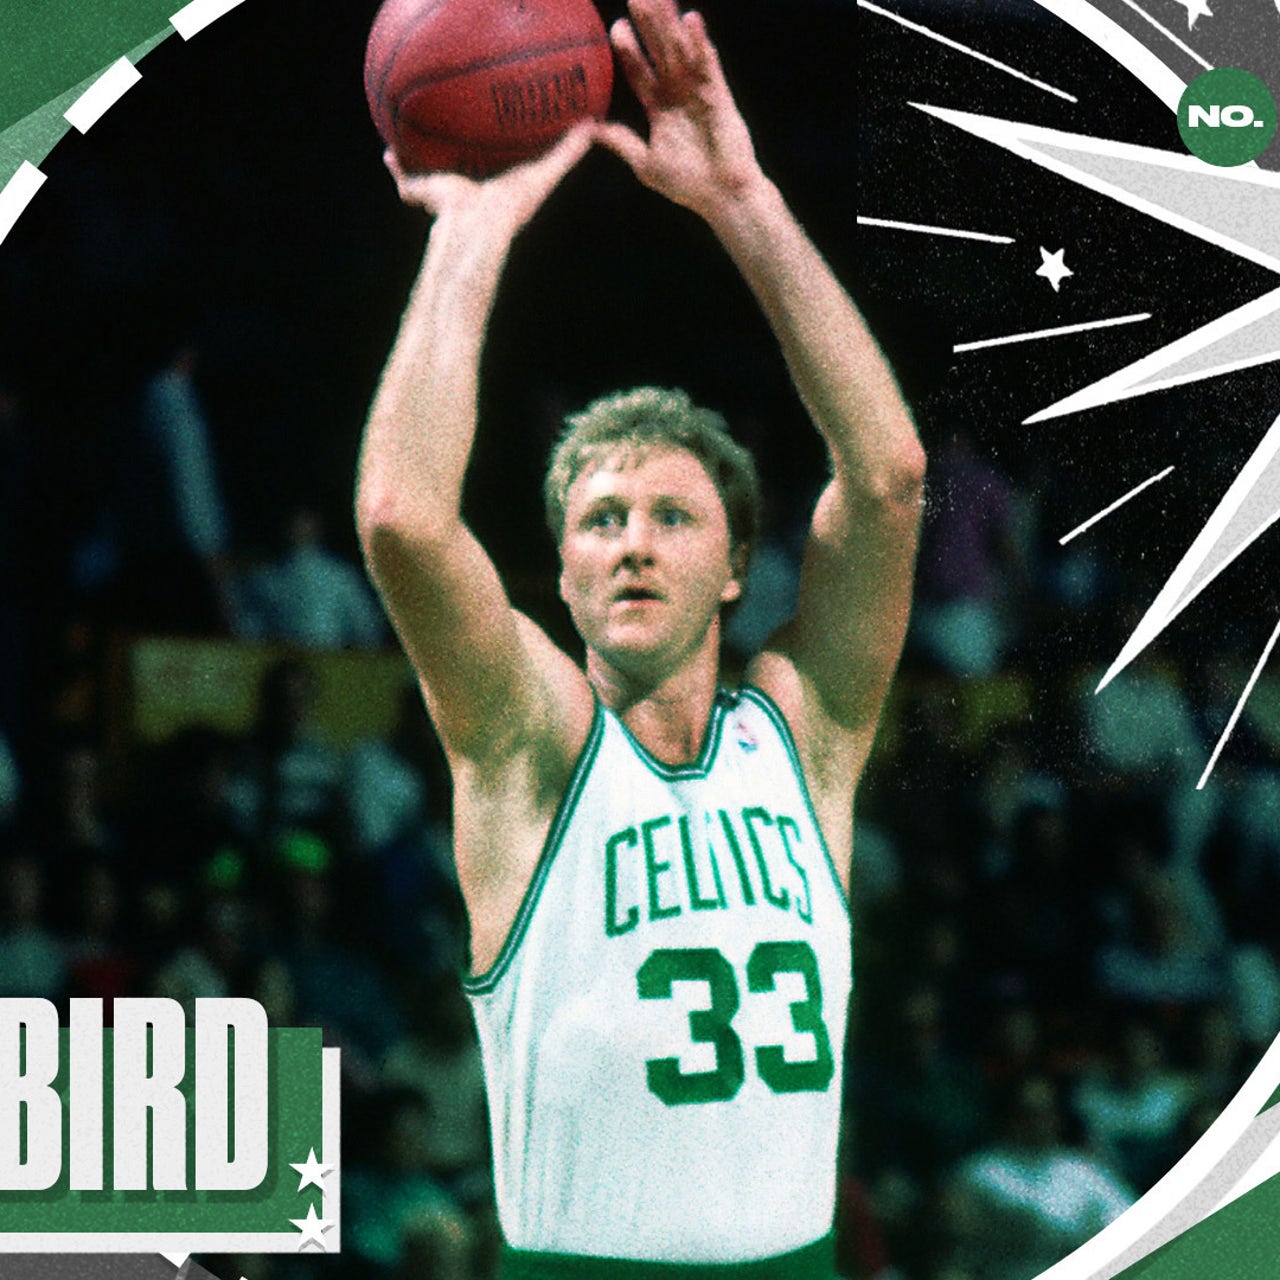 Top 50 NBA players from last 50 years Larry Bird ranks No